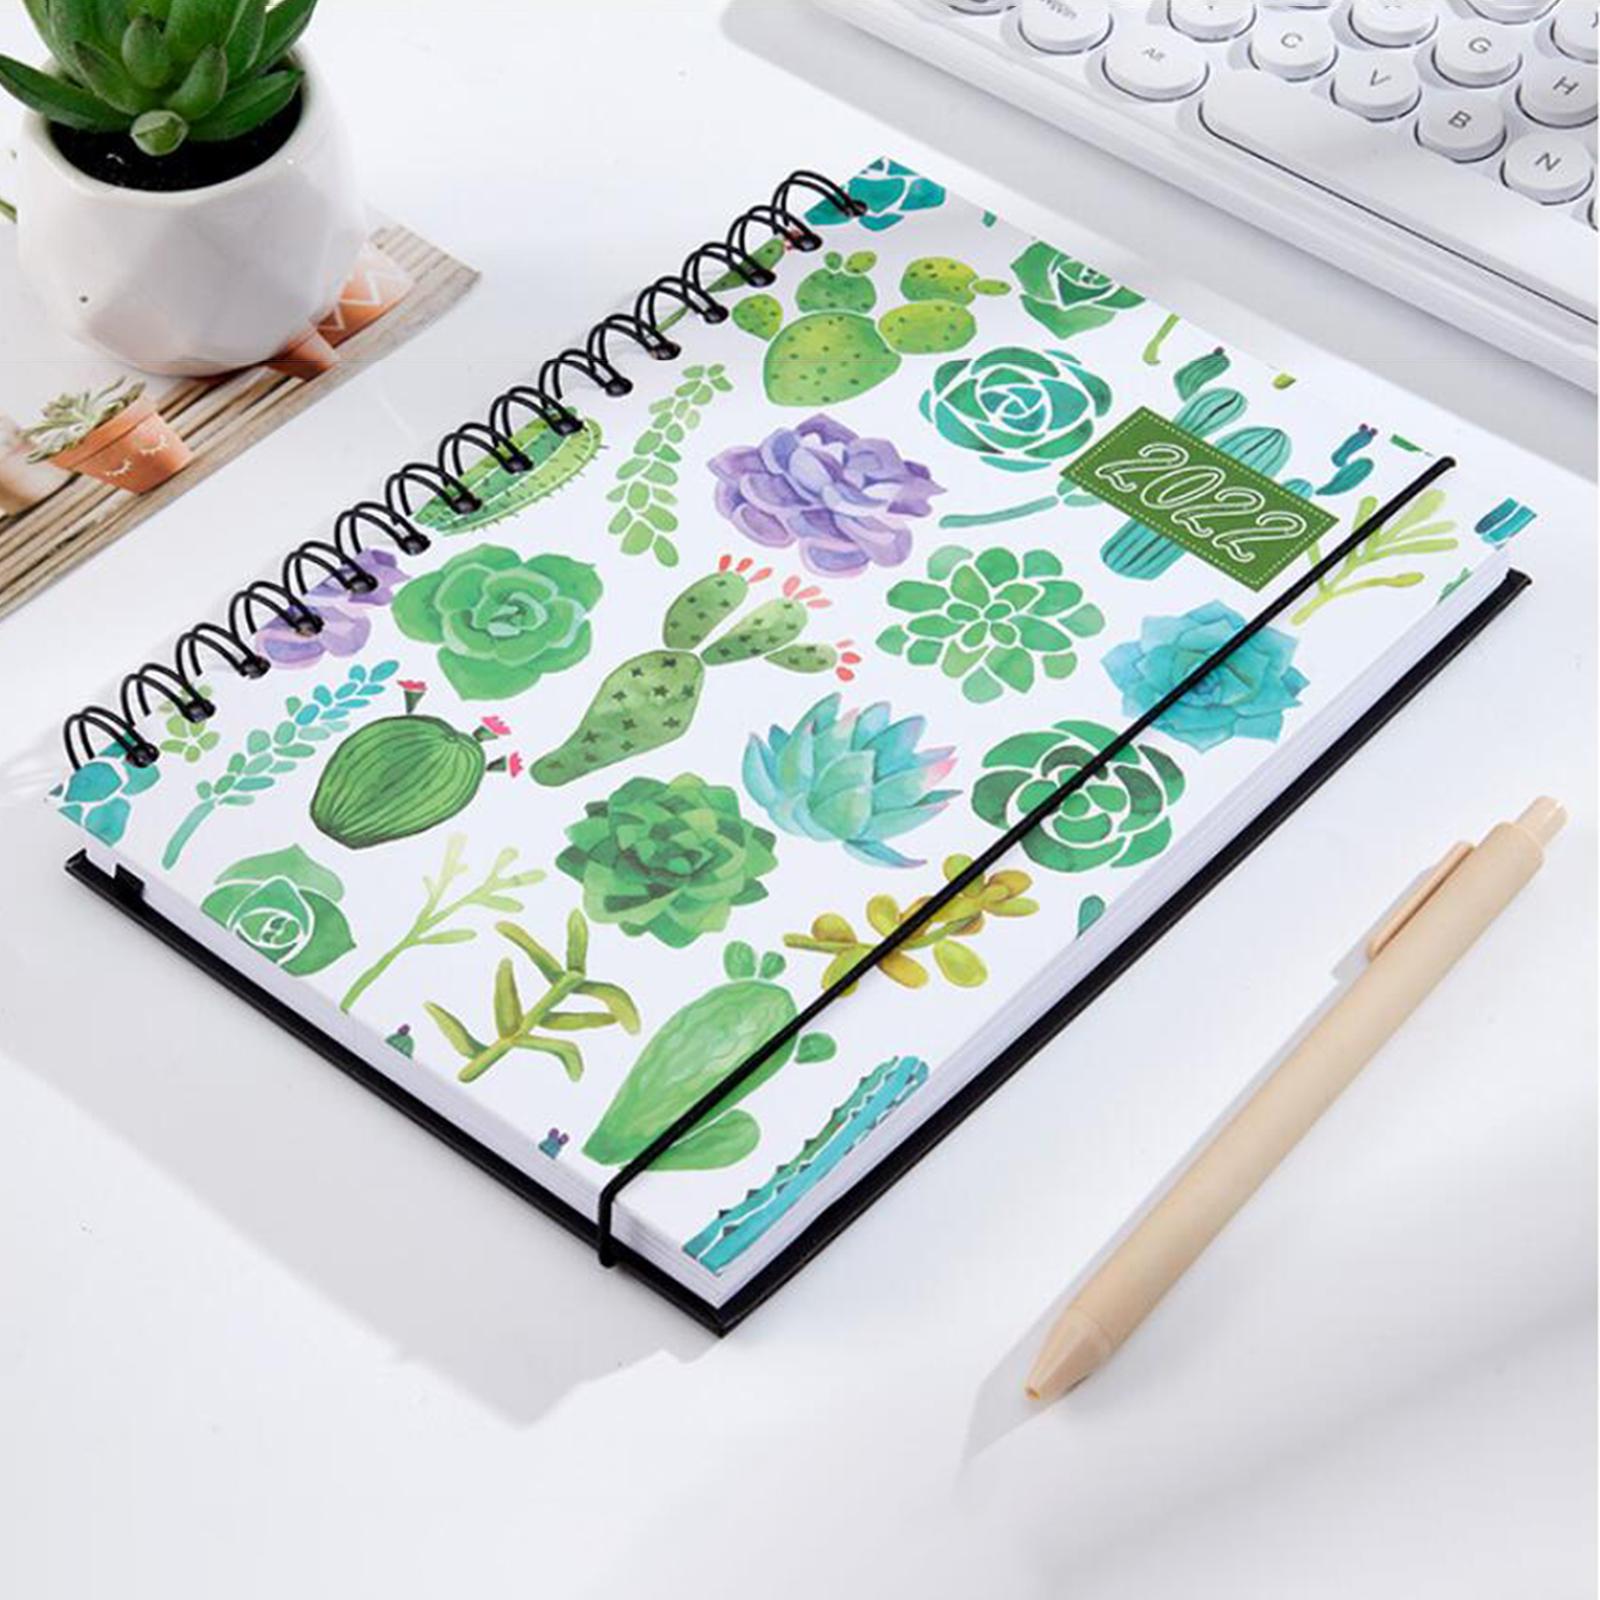 Writing Pads Daily Business Notepad 165 Sheets for Student Office School E